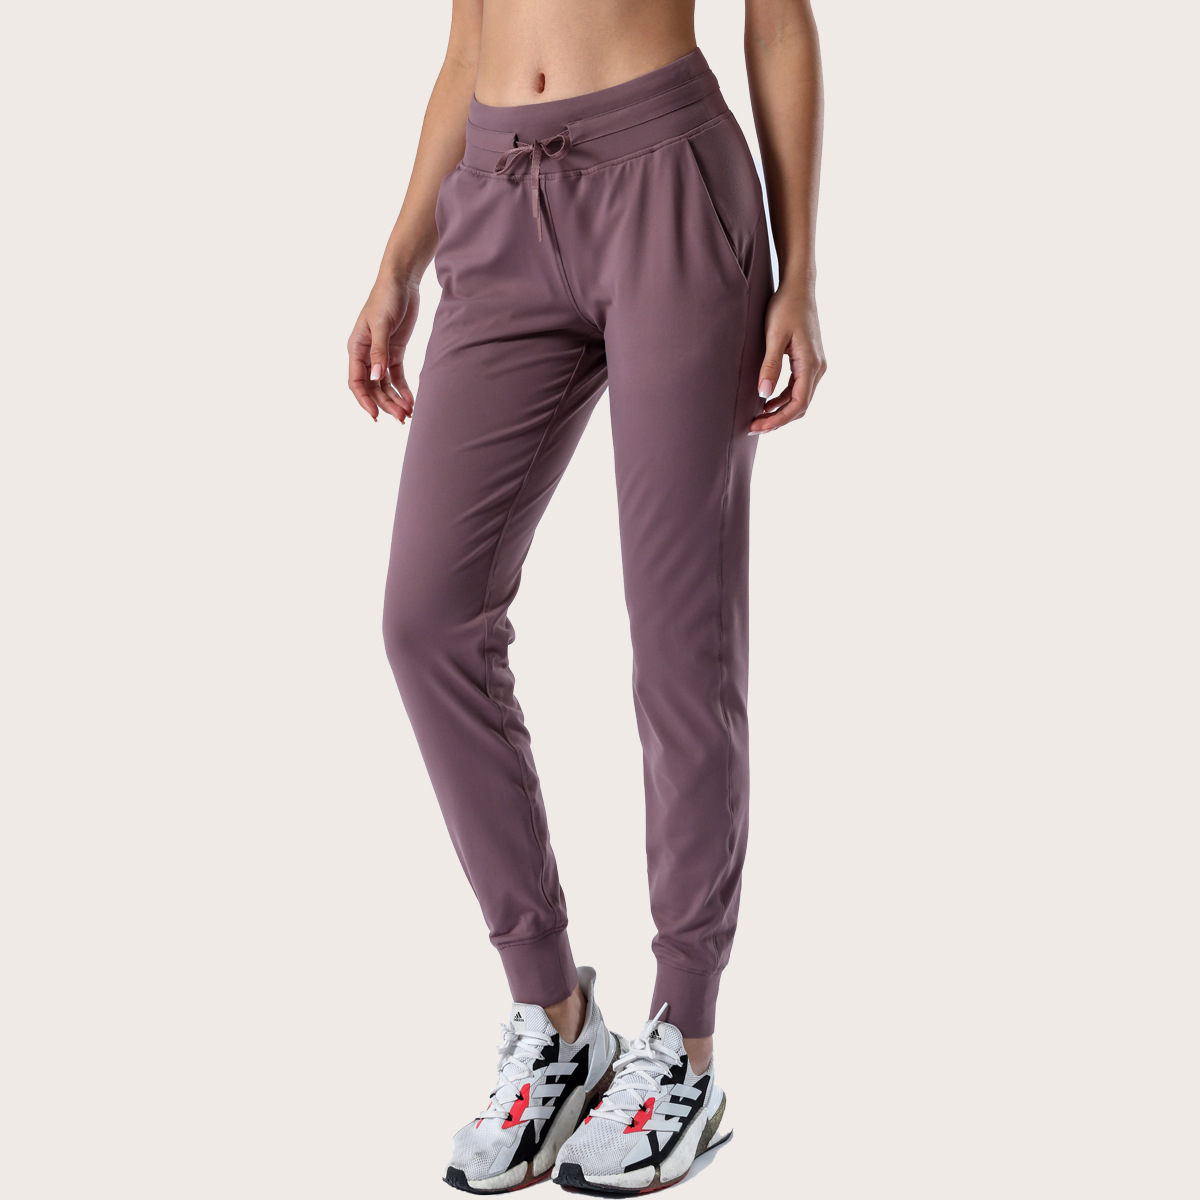 2078 excellent jogger Featured Image